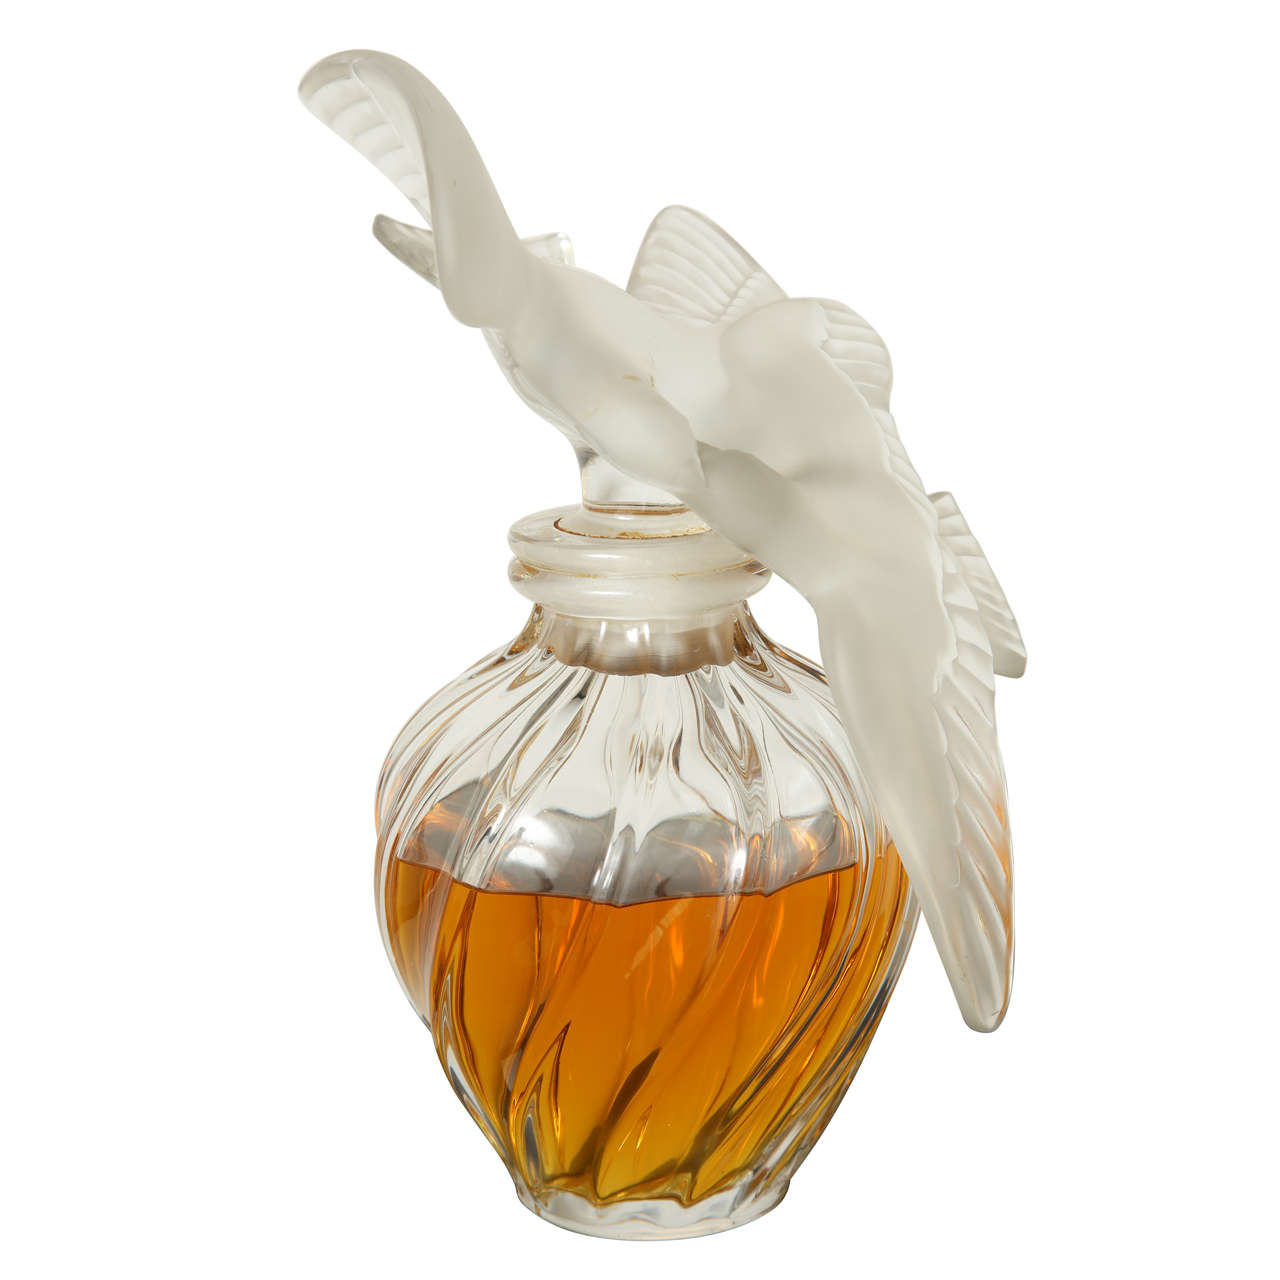 Lalique bottle, signed. Filled with LʼAir du Temps at 1stdibs